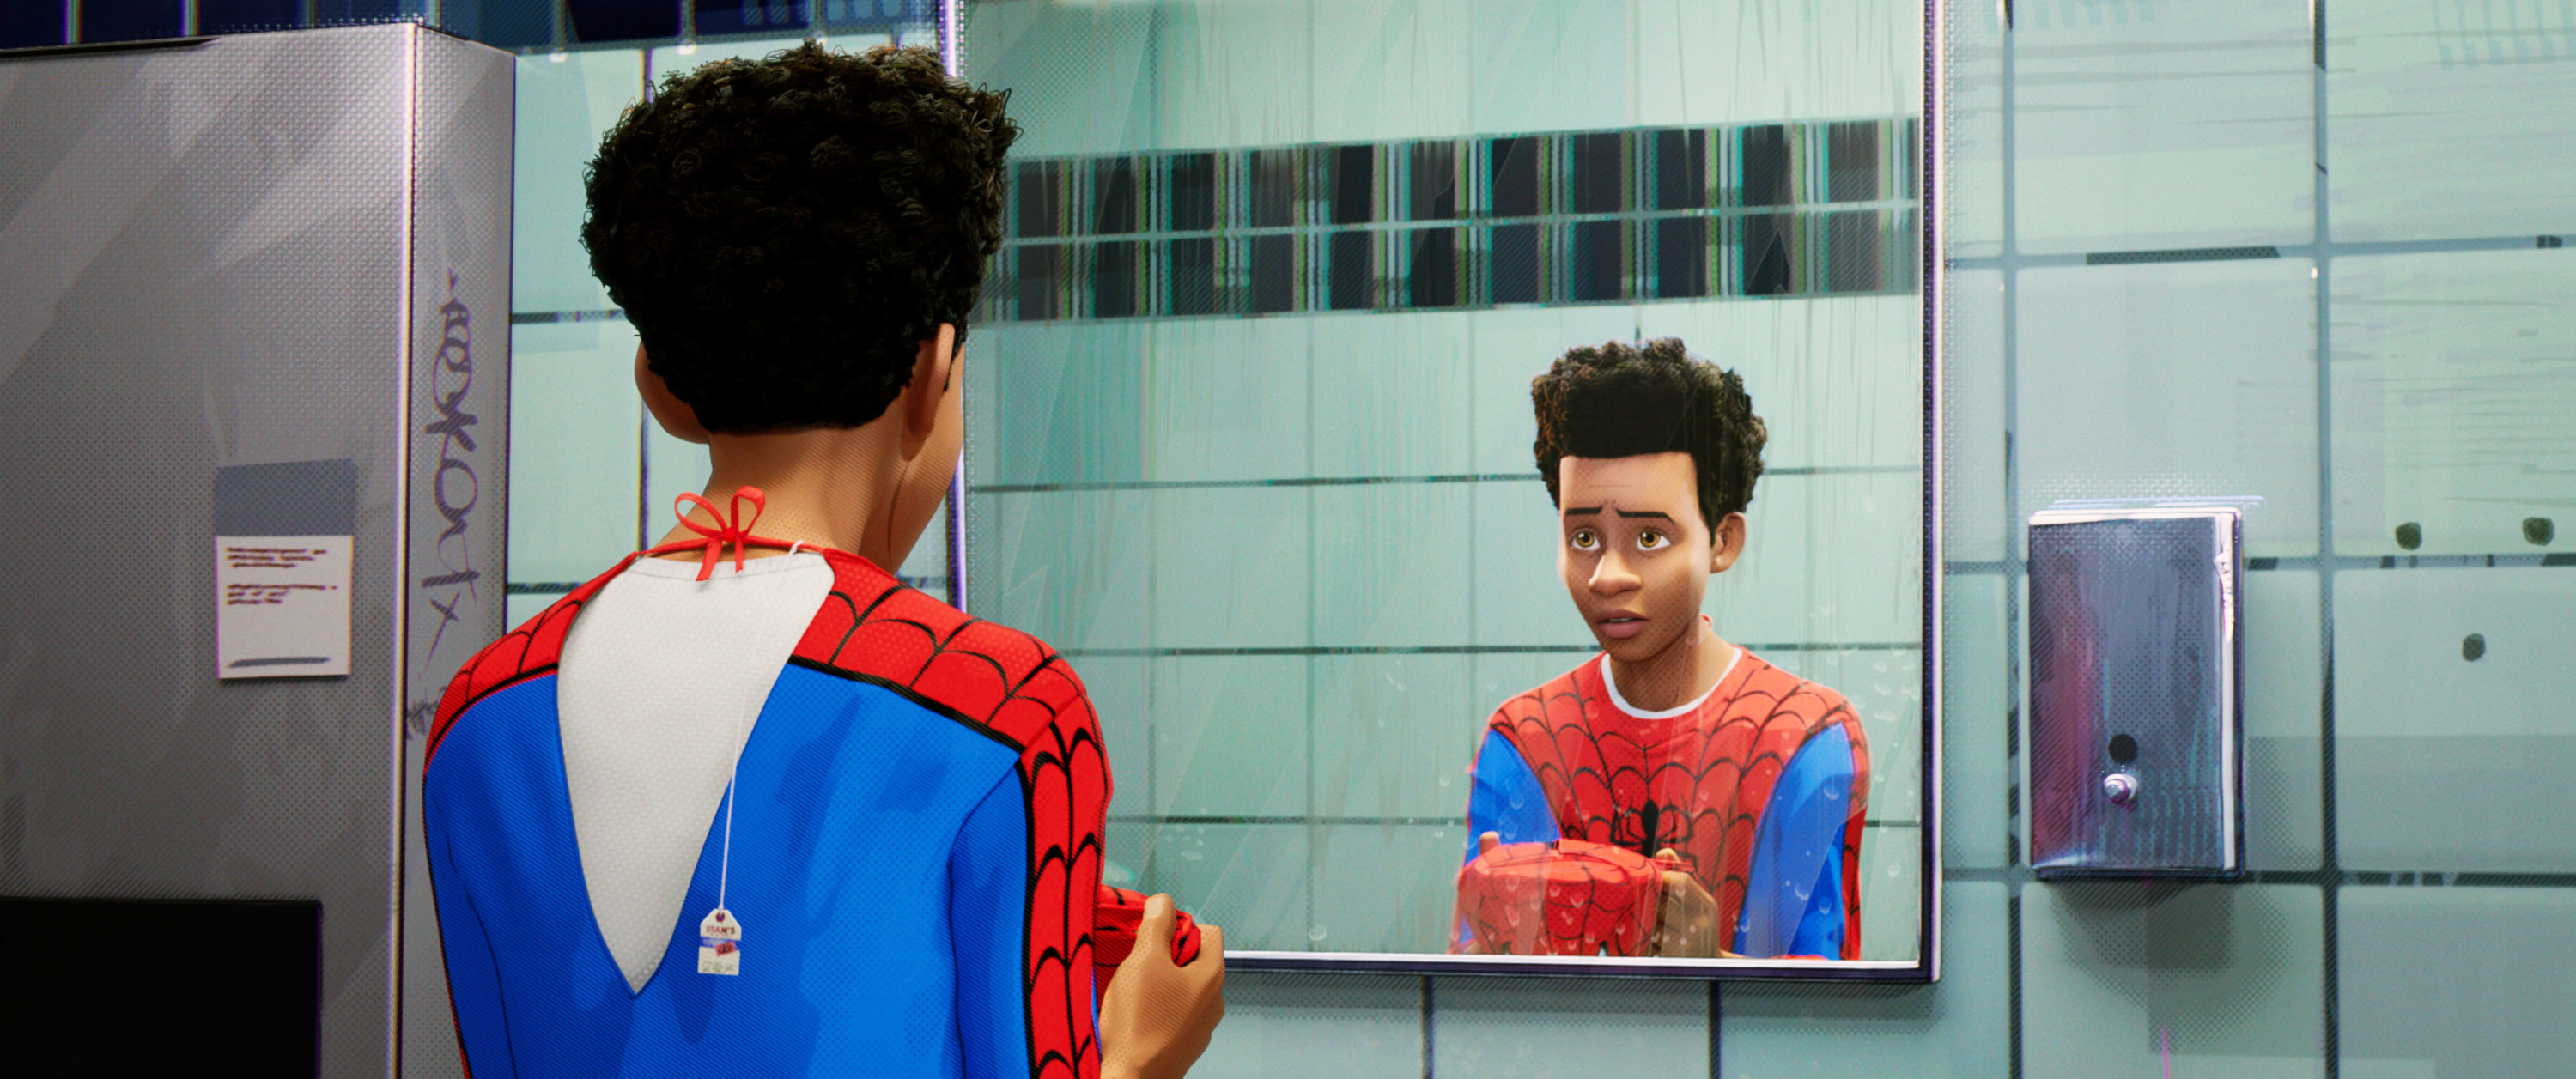 miles looking at himself in the mirror while wearing his spider-man costume